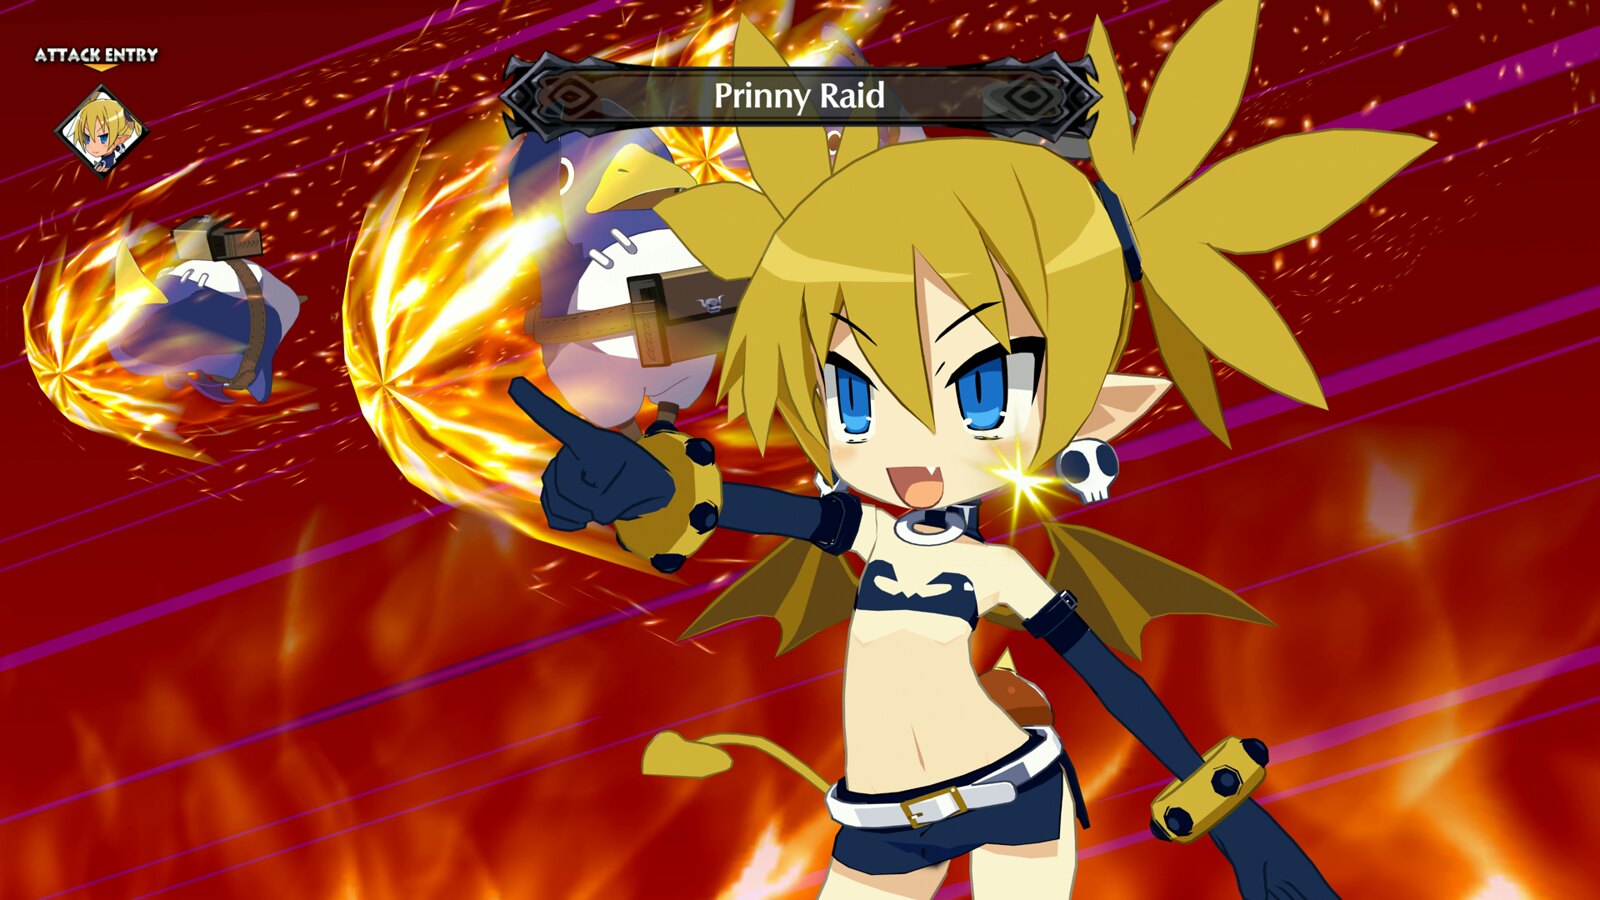 Meet The Cast Of Disgaea 6 Complete, Coming To PS5 And PS4 June 28.